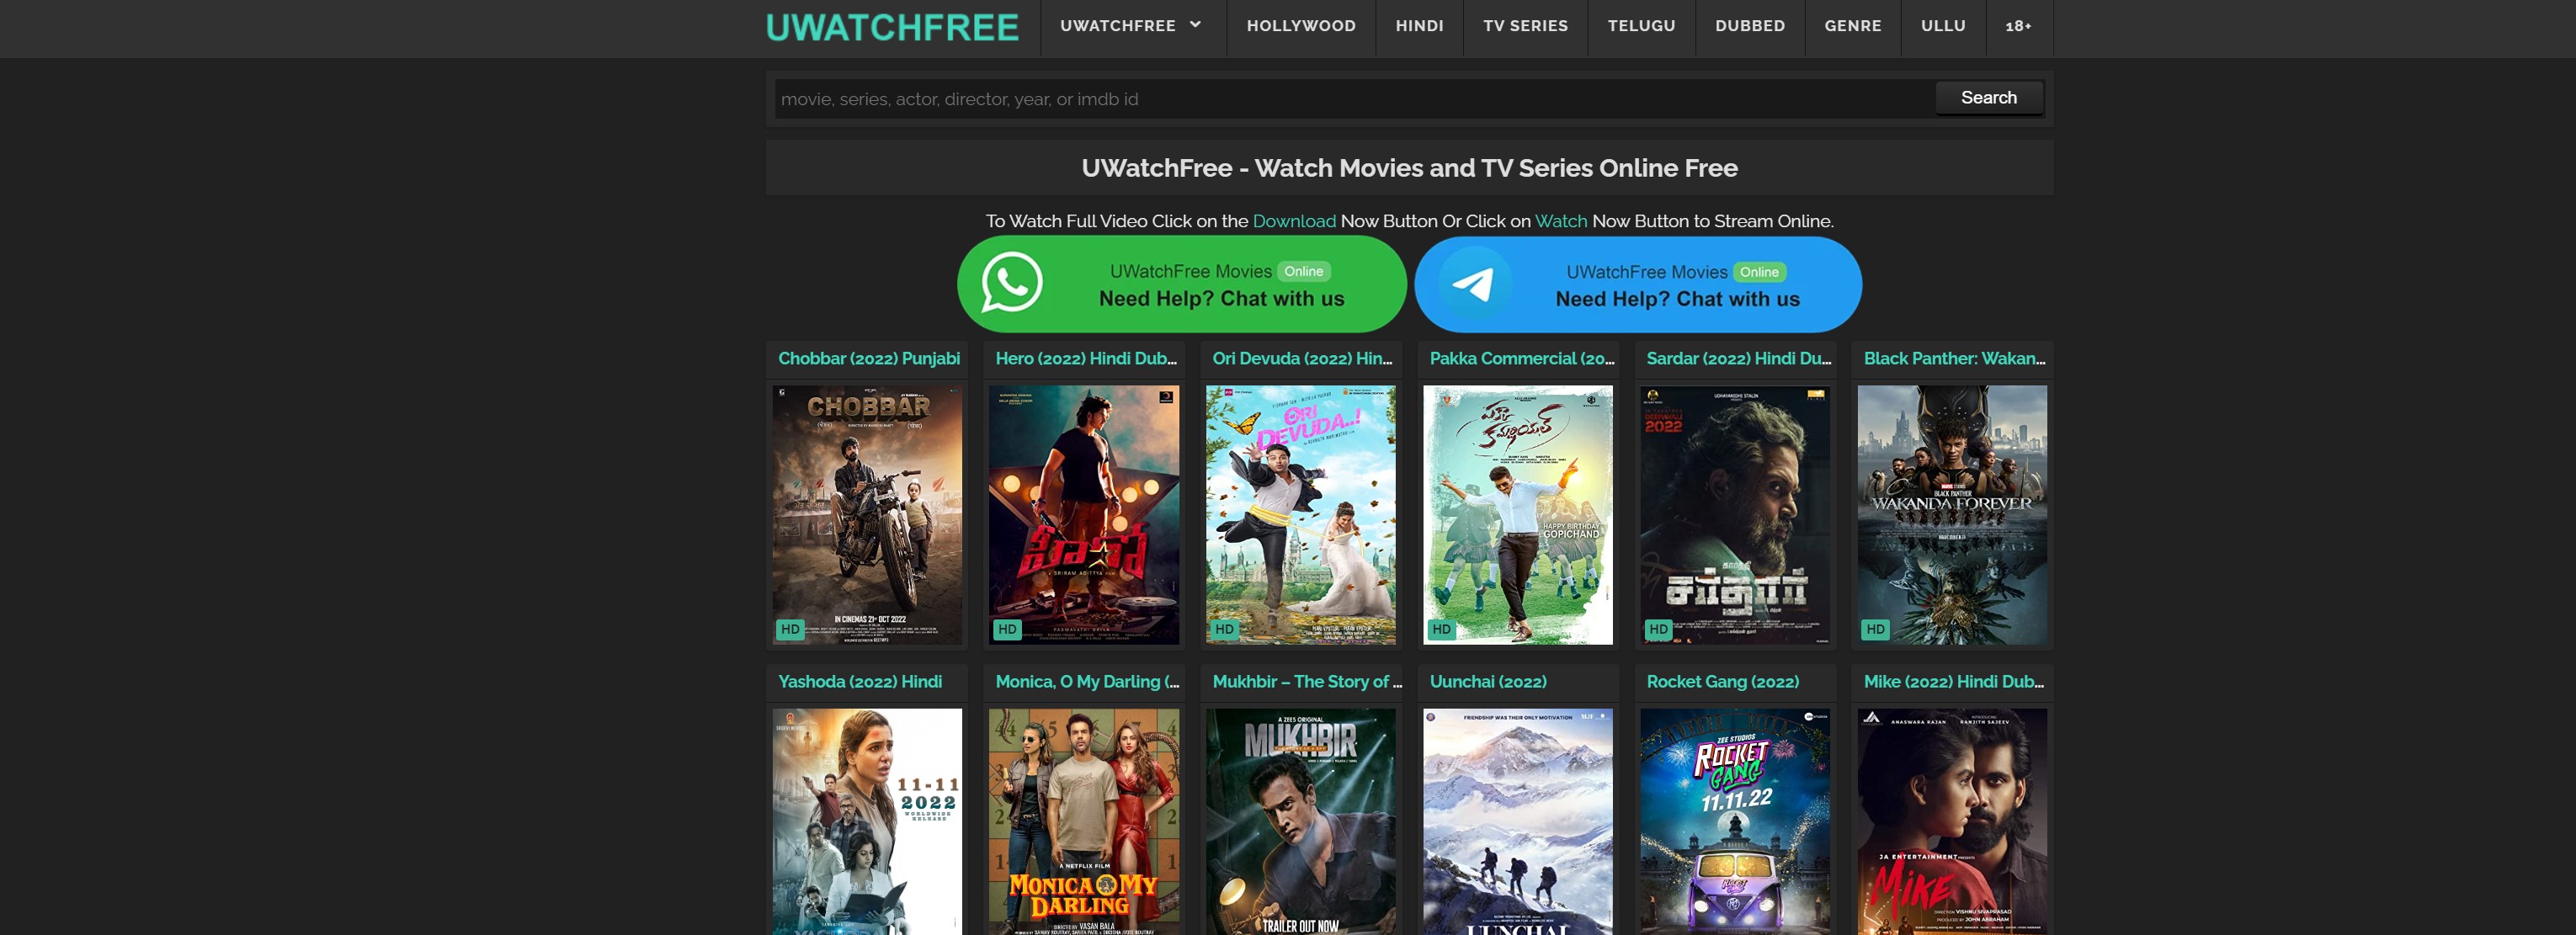 The Ultimate Guide to Uwatchfree: Finding Hidden Movie Gems - How to access Uwatchfree safely and securely